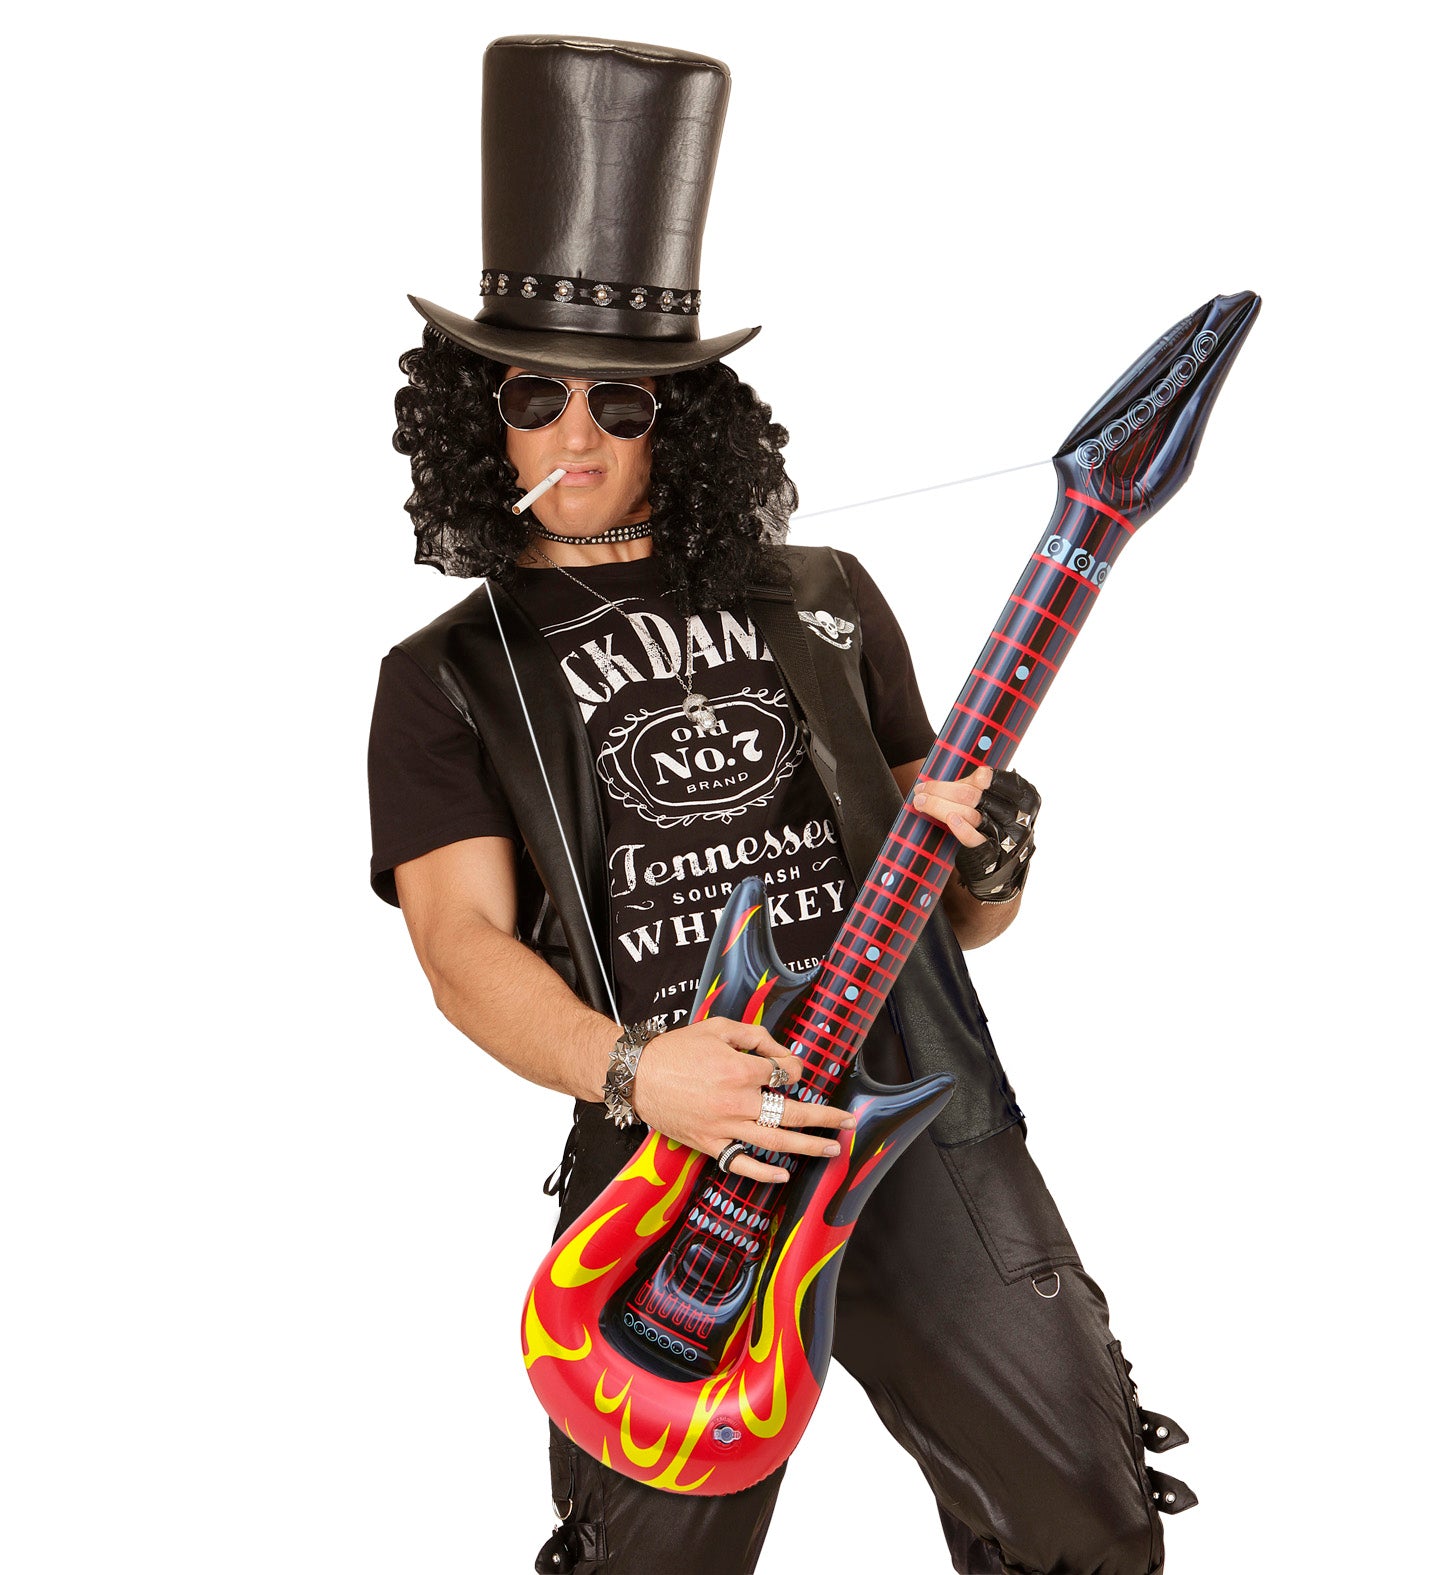 Inflatable Rock Star Guitar with flames